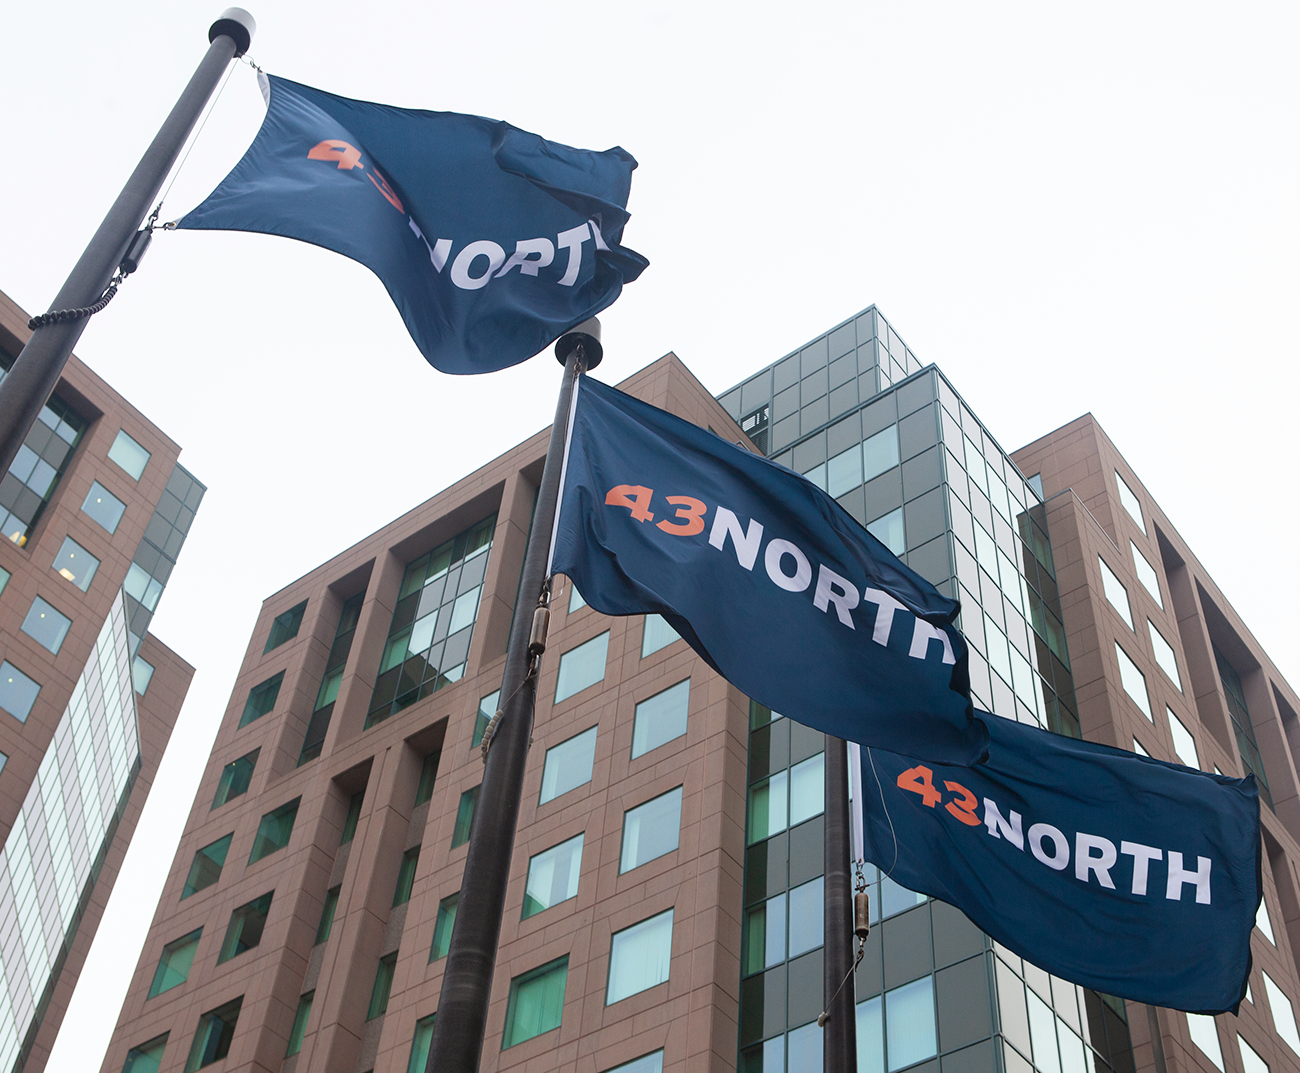 43 North Flags